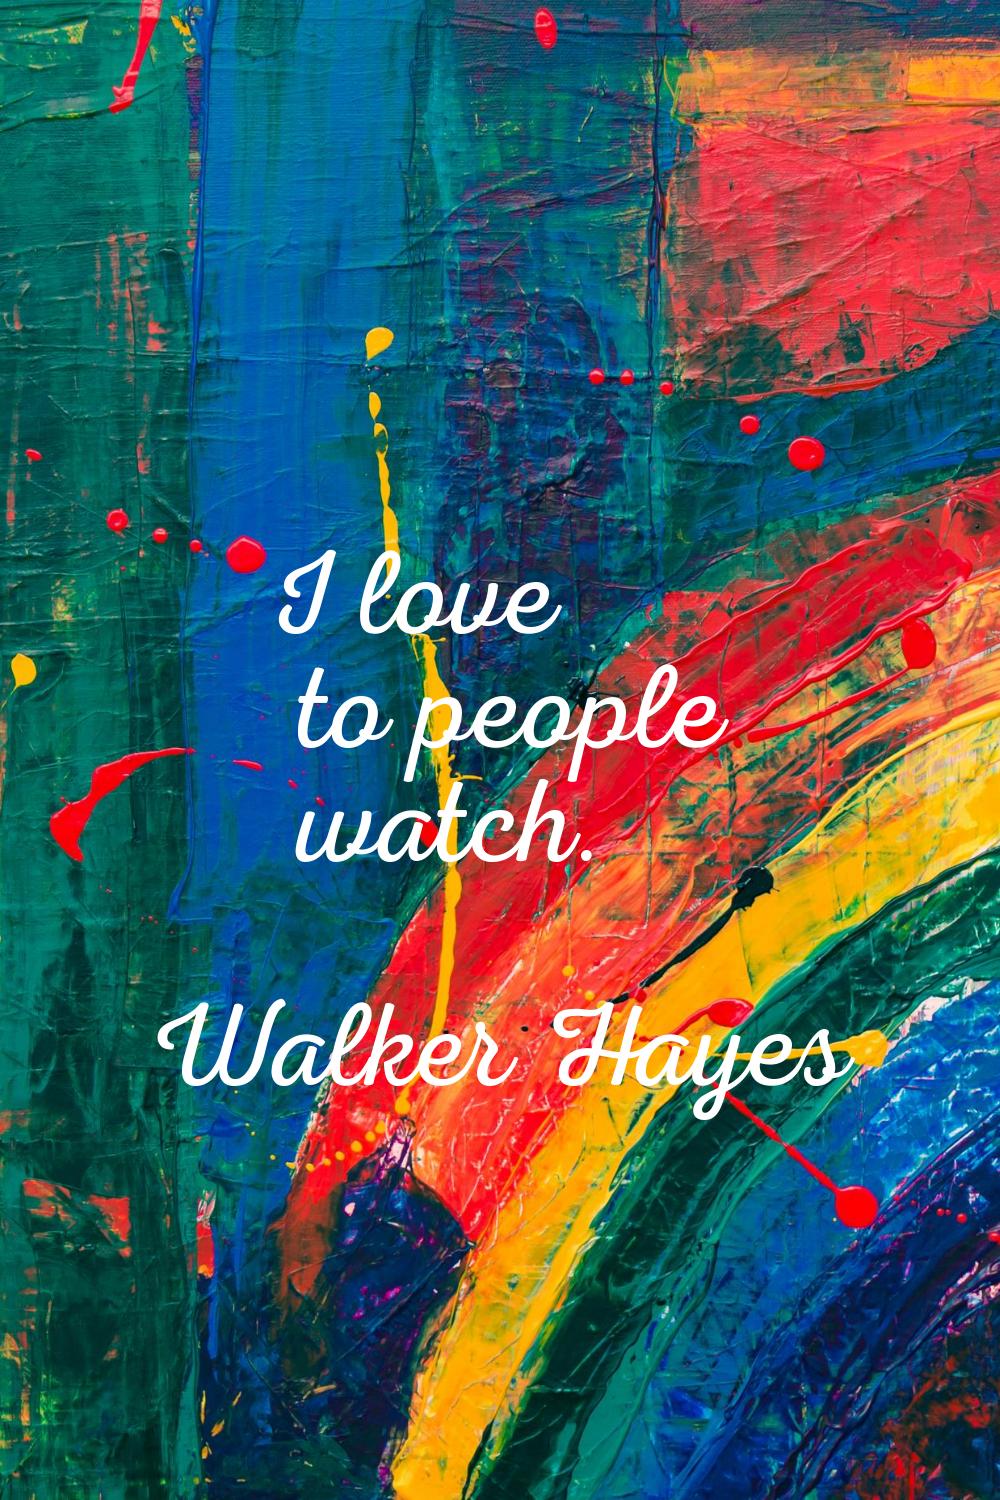 I love to people watch.